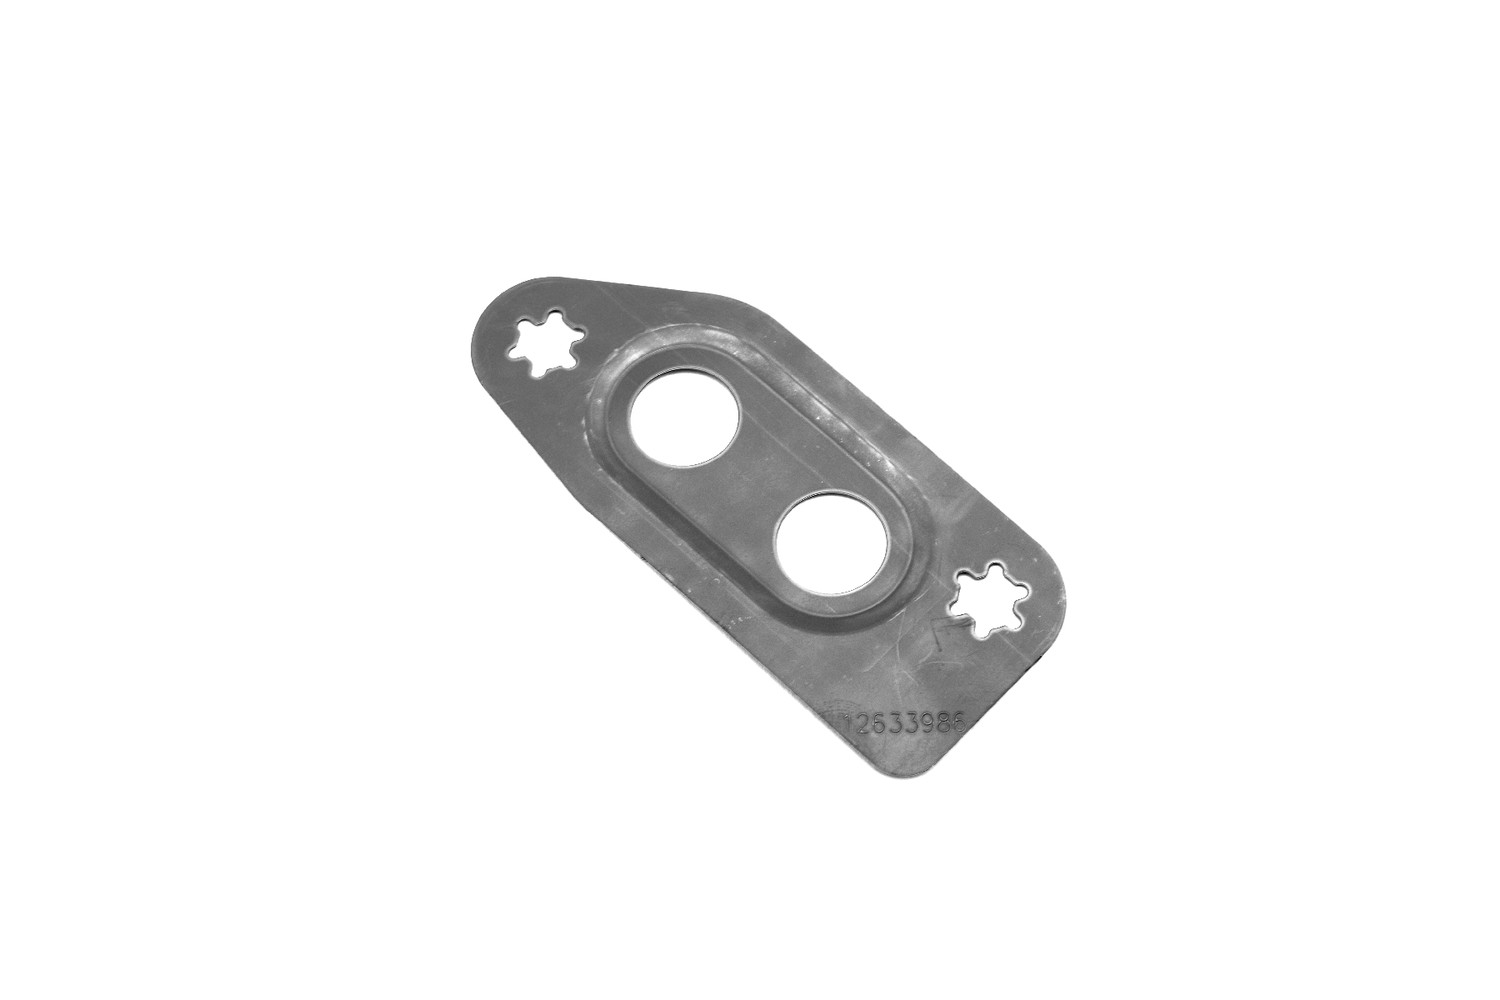 GM GENUINE PARTS - Engine Oil Pan Cover Gasket - GMP 12633986